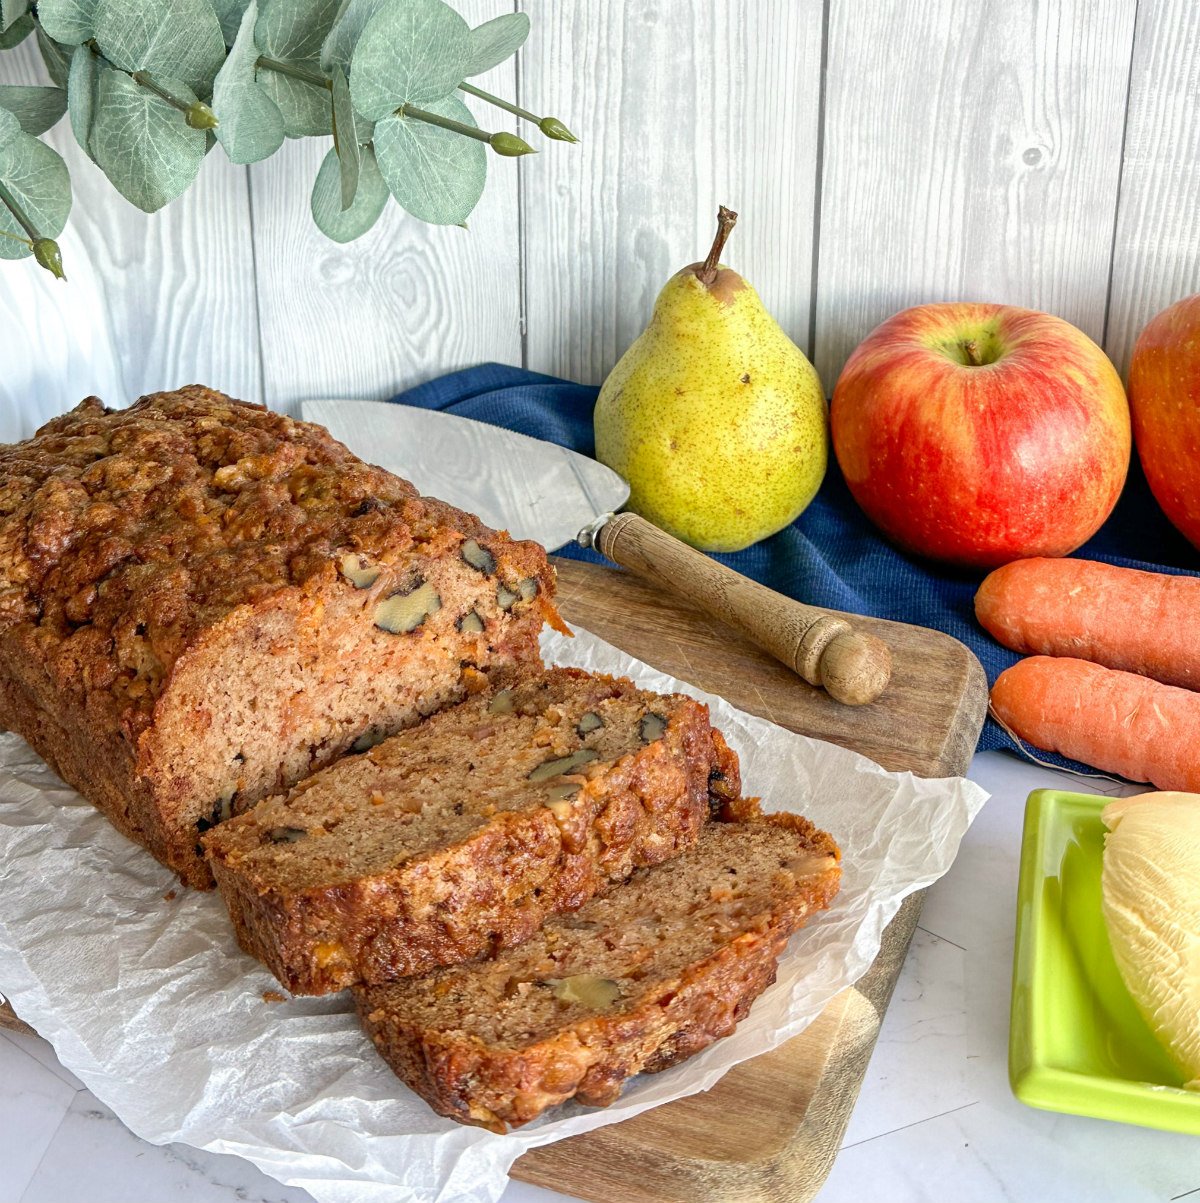 Apple, Pear, Carrot Loaf with walnuts sliced